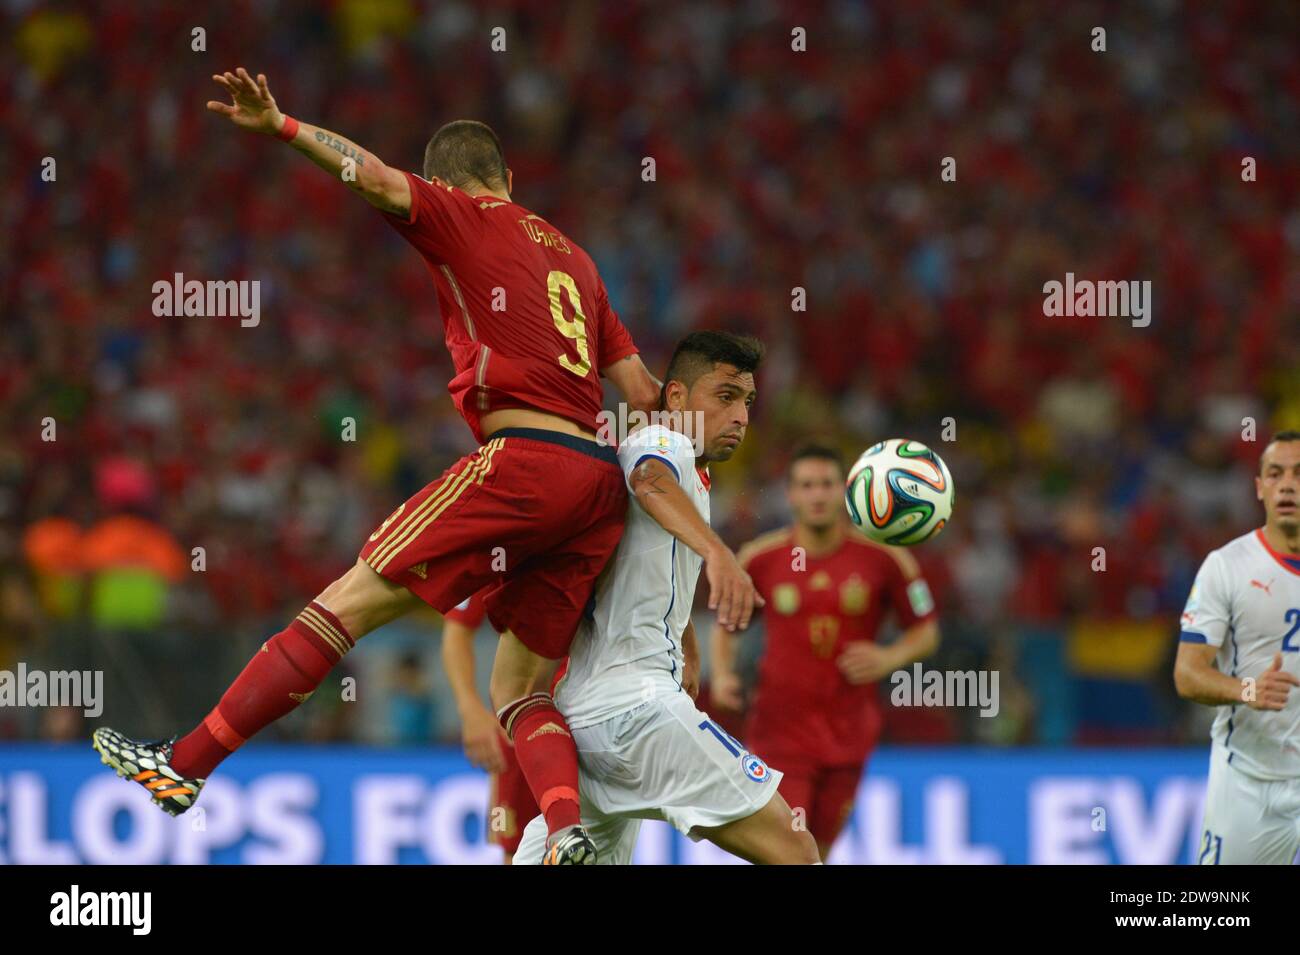 Spain's Fernando Torres battling Chile's Gonzalo Jara during Soccer World Cup 2014 First round Group B match Spain v Chile at Maracana Stadium, Rio de Janeiro, Brazil , on June 18, 2014. Chile won 2-0 and ousted the defending champions from the competition. Photo by Henri Szwarc/ABACAPRESS.COM Stock Photo